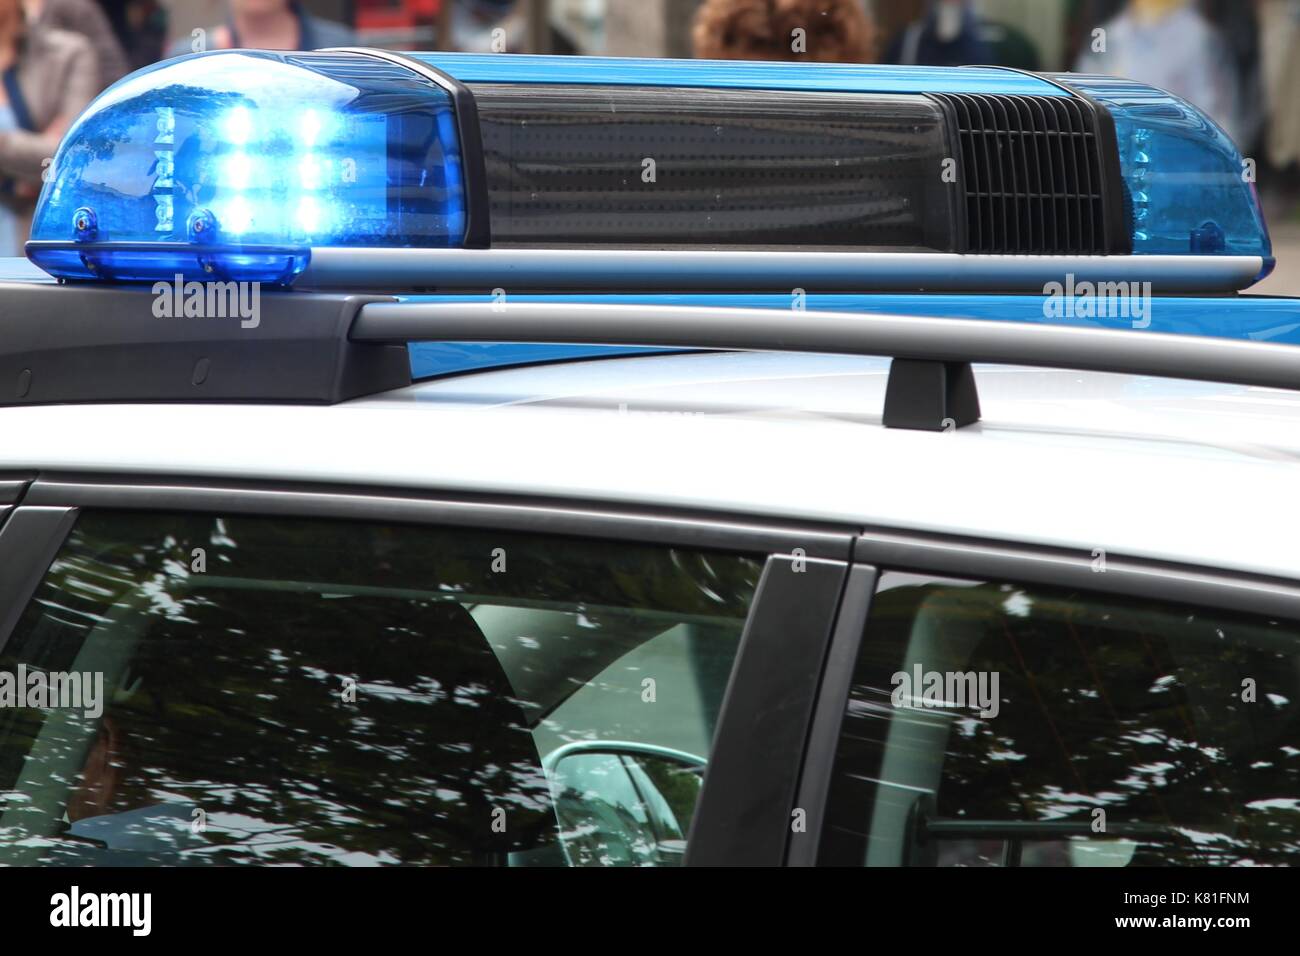 police car with active blue emergency vehicle lighting Stock Photo